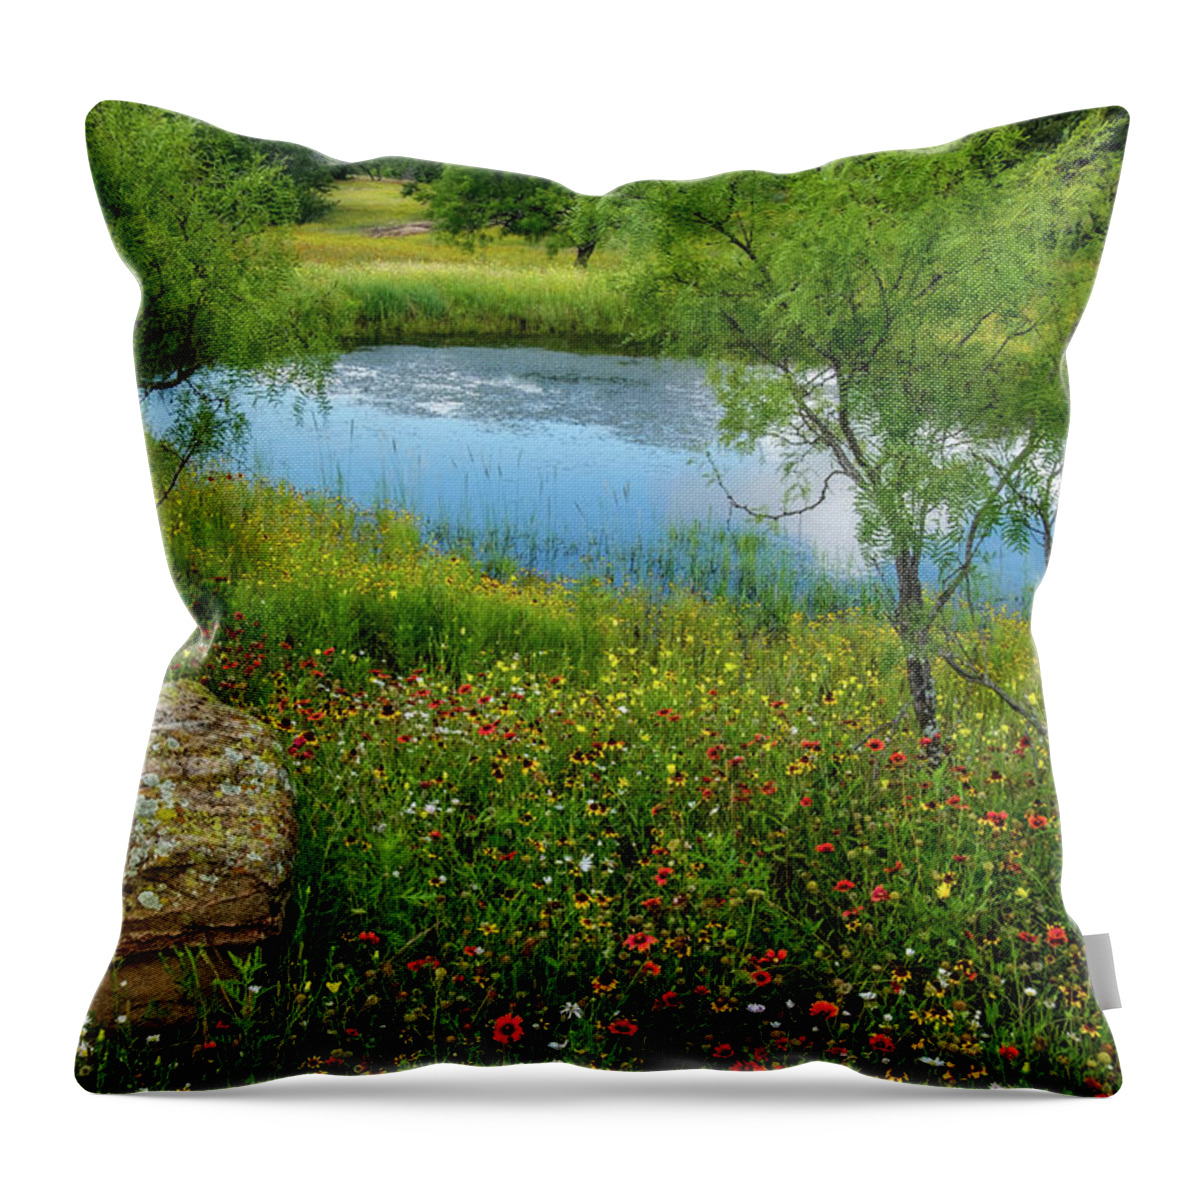 Texas Wildflowers Throw Pillow featuring the photograph Wildflower Pond by Johnny Boyd